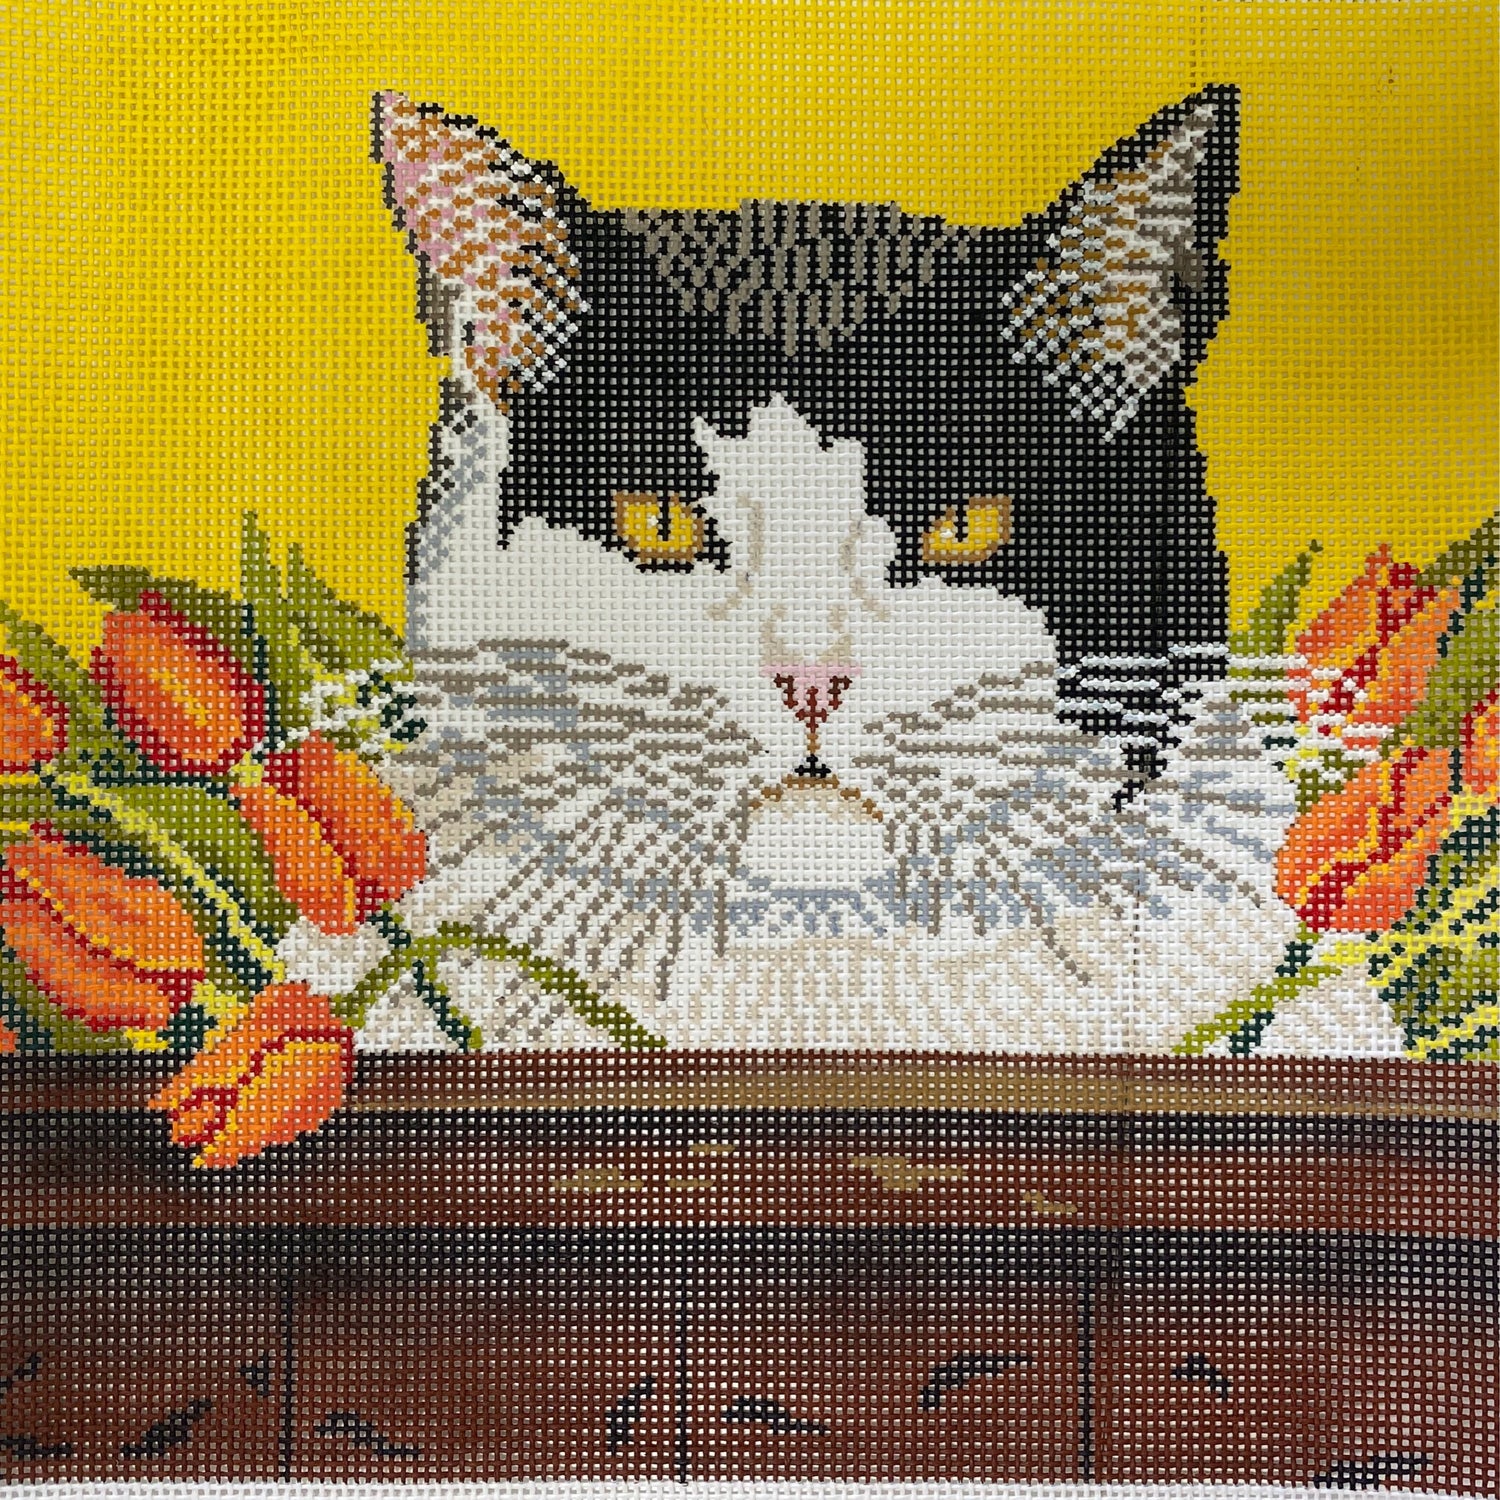 Black and White Cat with Tulips Needlecraft Canvas